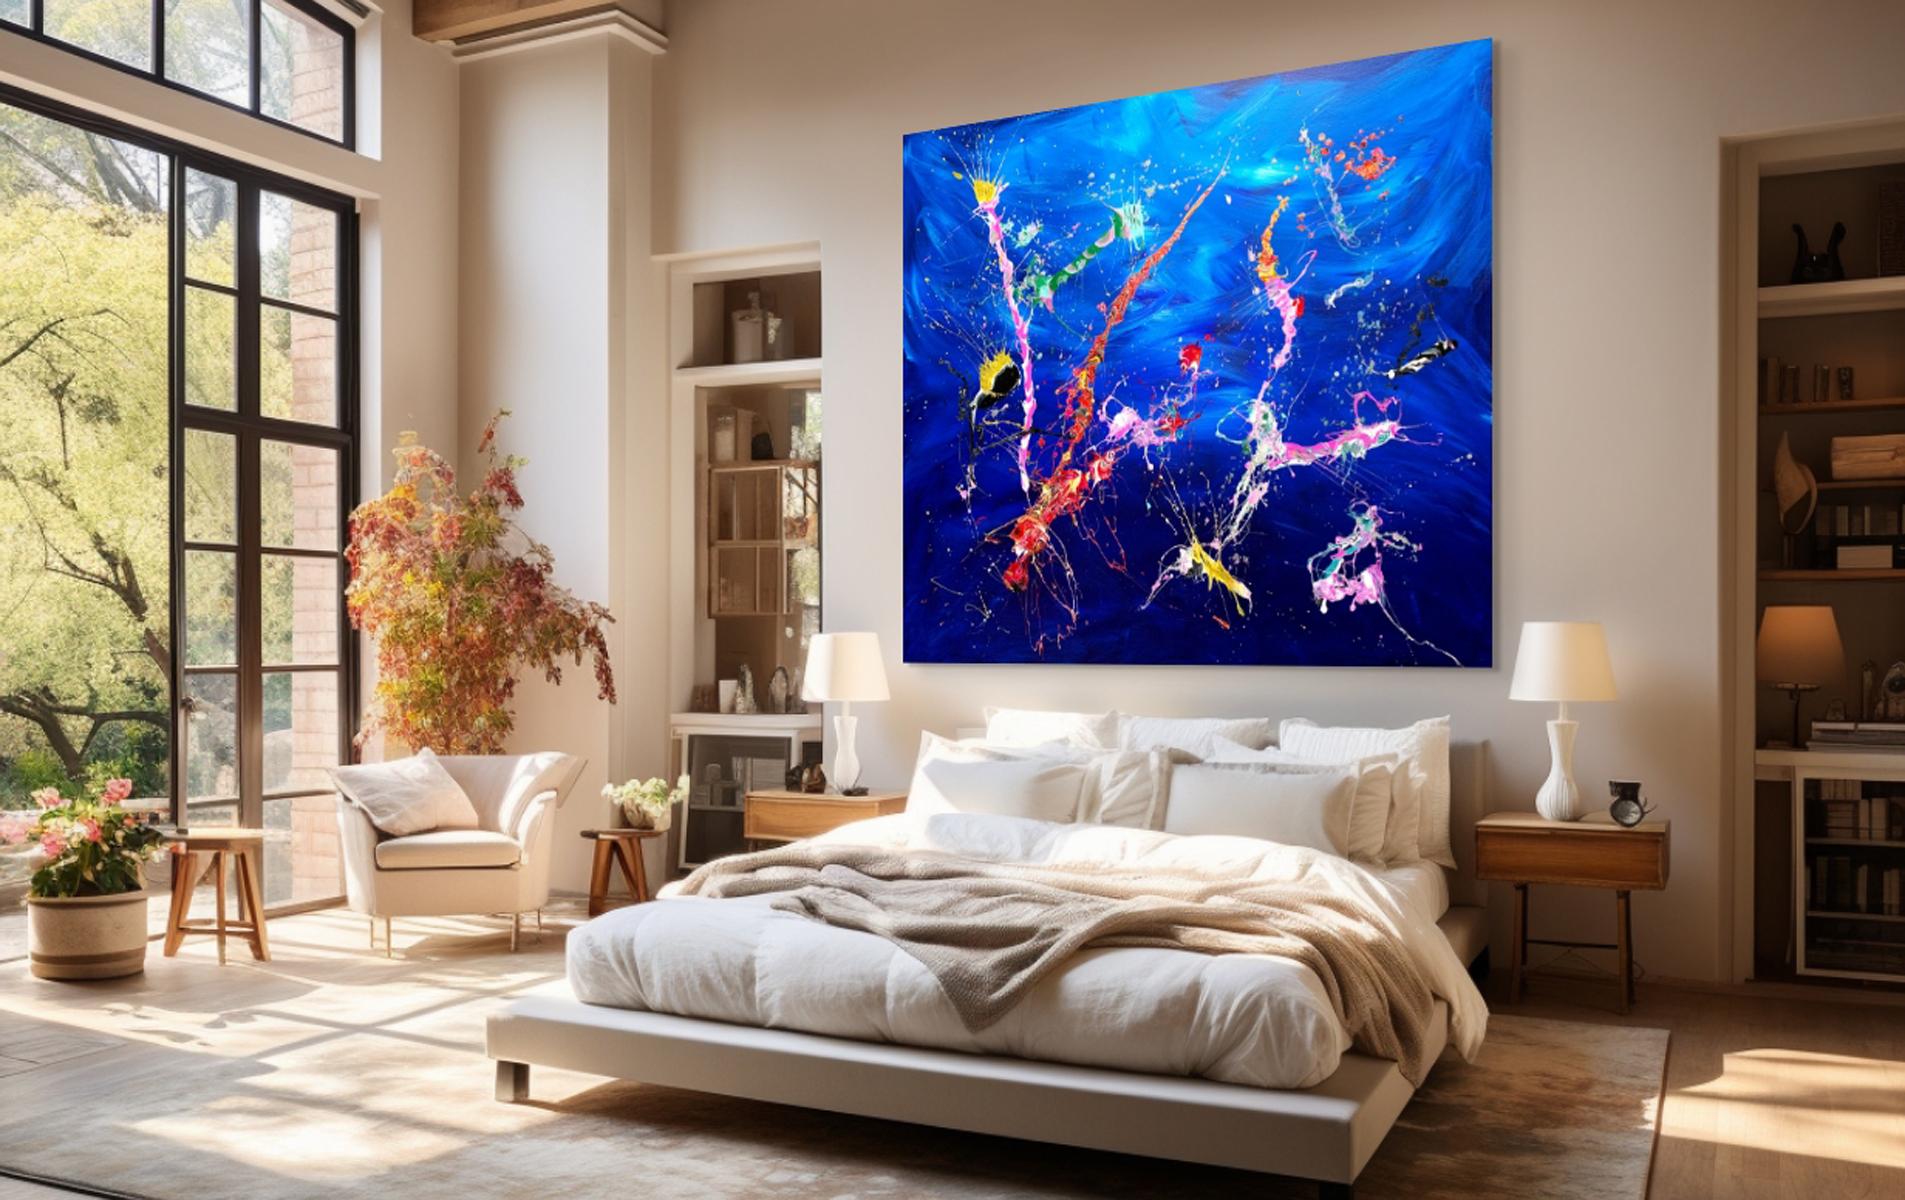 Deep Sea Creatures - The Gathering - Abstract Expressionist Painting by Estelle Asmodelle